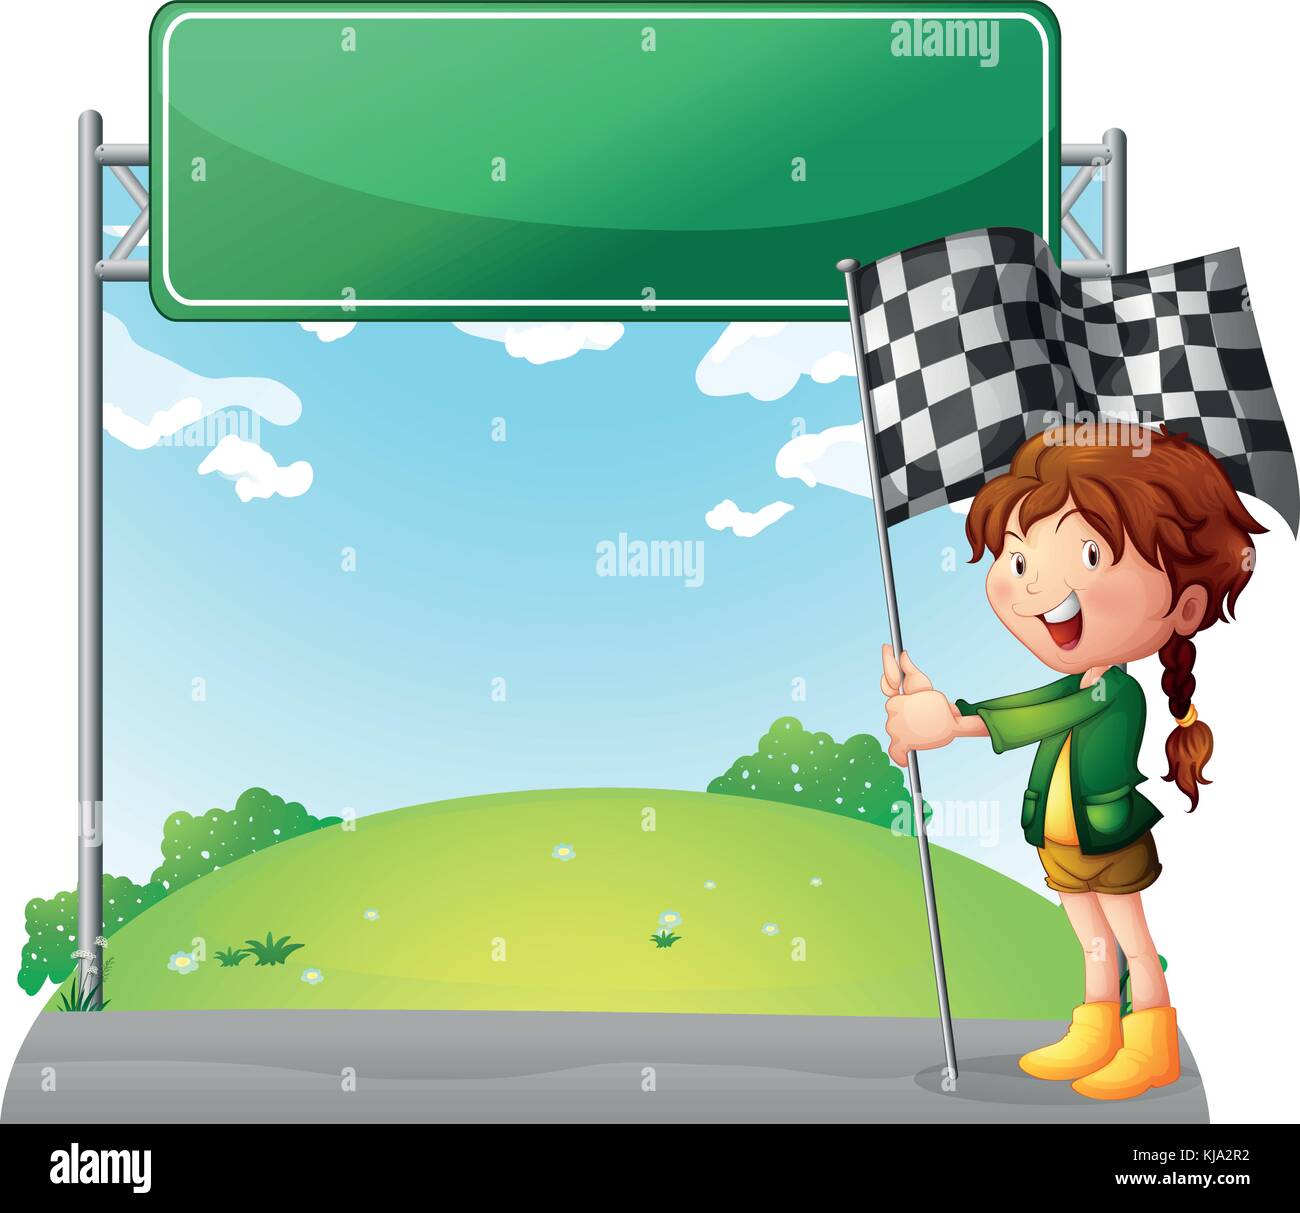 Illustration of a girl holding a racing flag on a white background Stock Vector